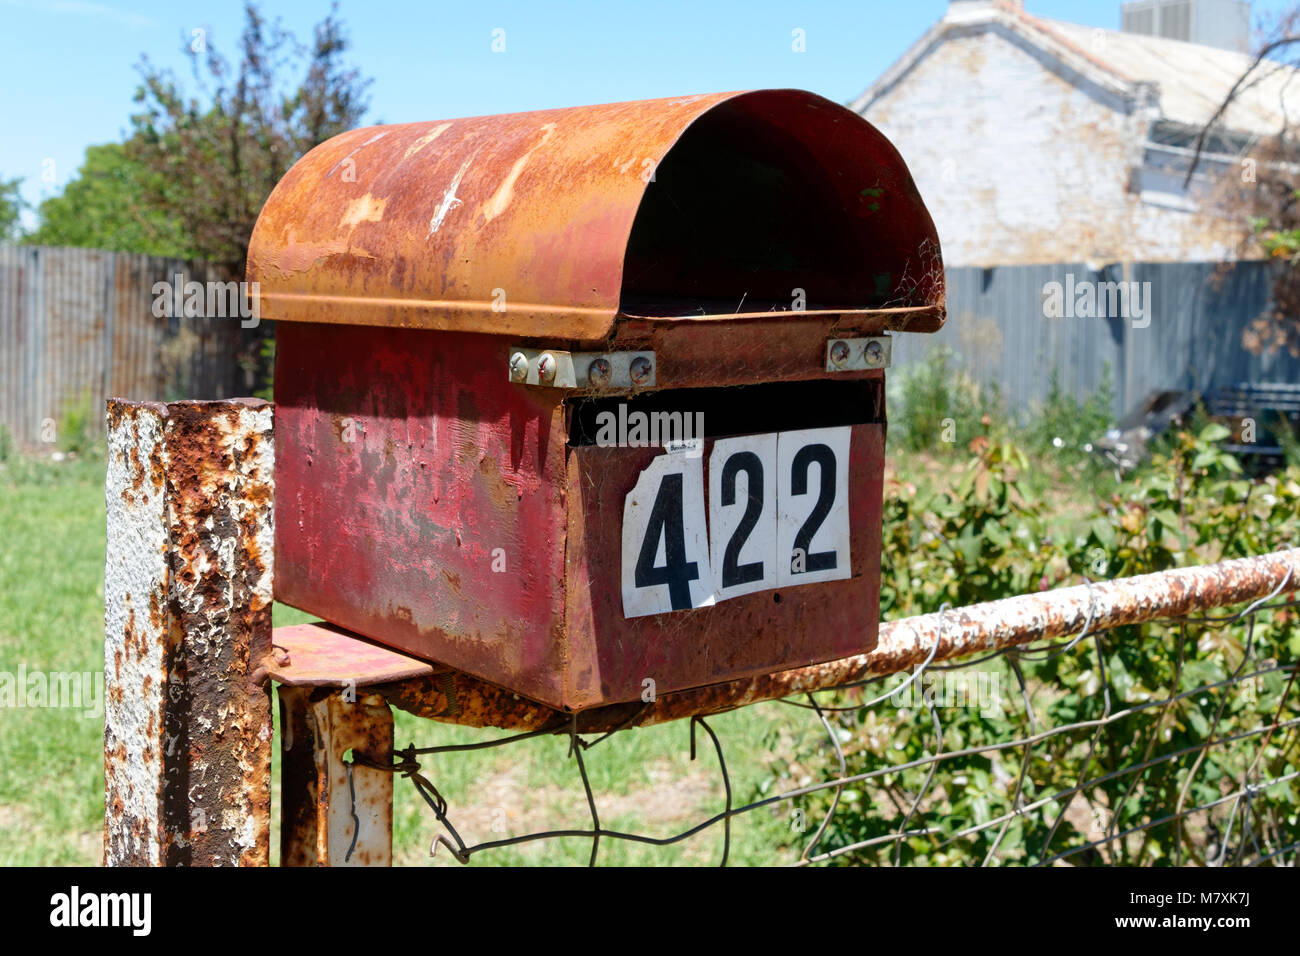 Old metal letterbox on fence, Hay, New South Wales, Australia. Stock Photo